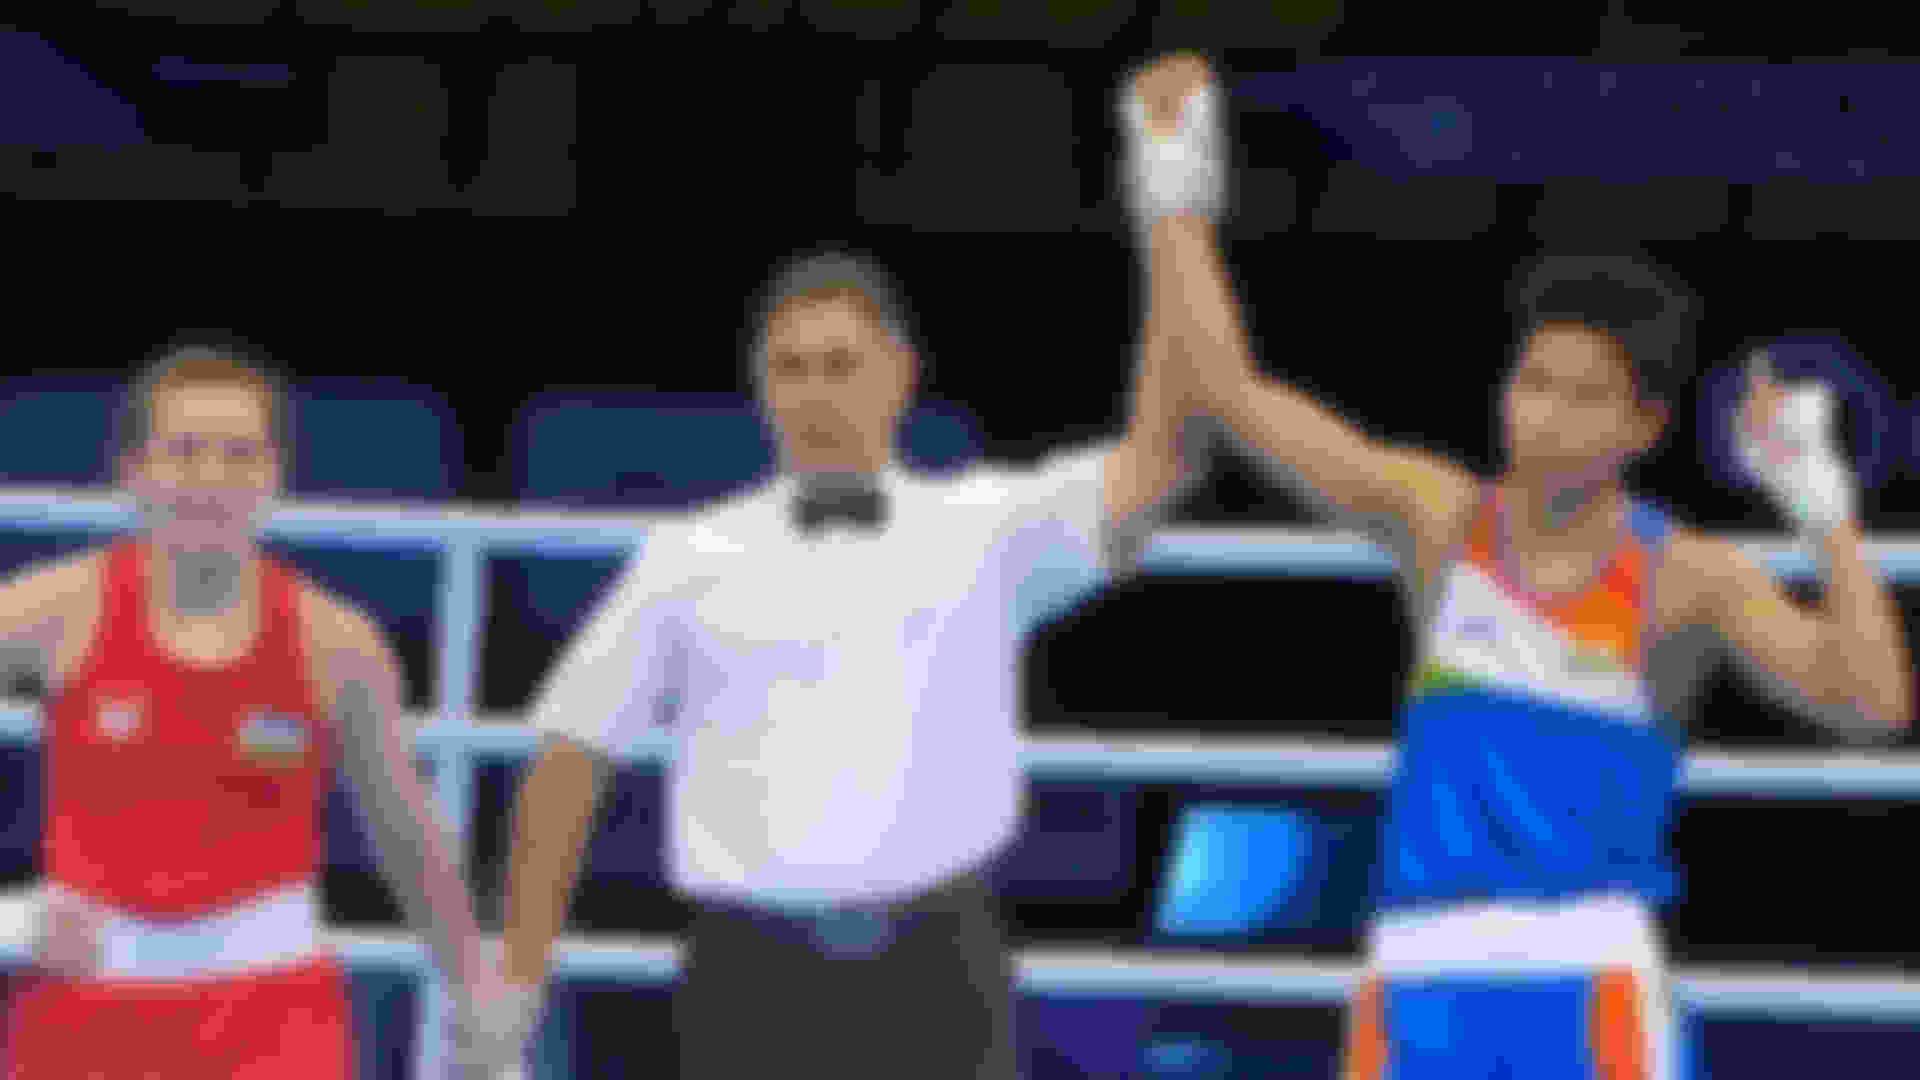 Lovlina Borgohain has sealed her Olympic berth at the Asian boxing Olympic qualifiers